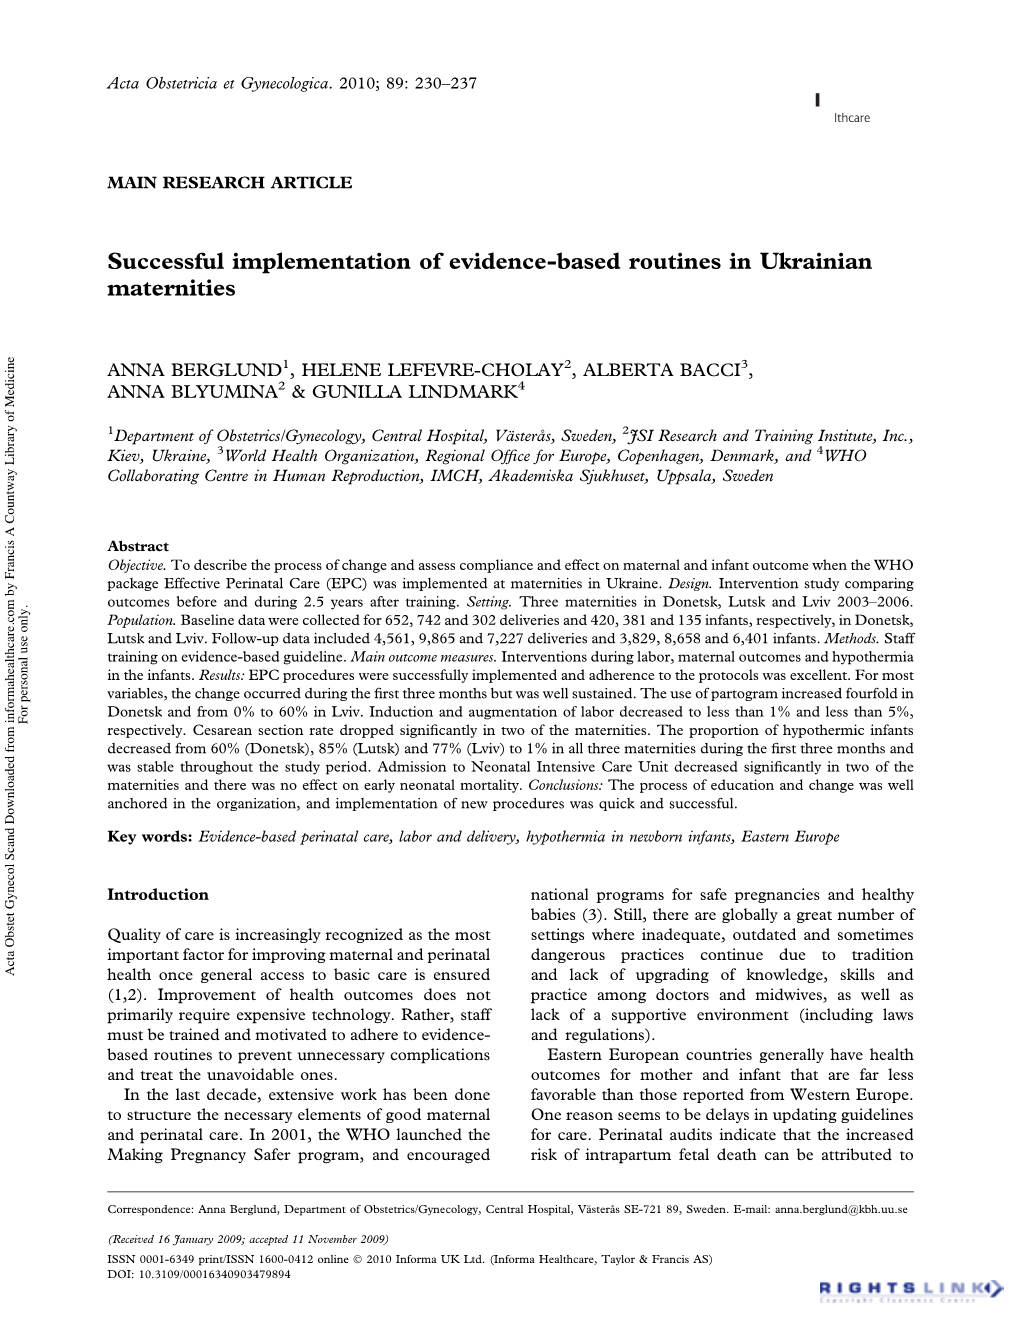 Successful Implementation of Evidence-Based Routines in Ukrainian Maternities